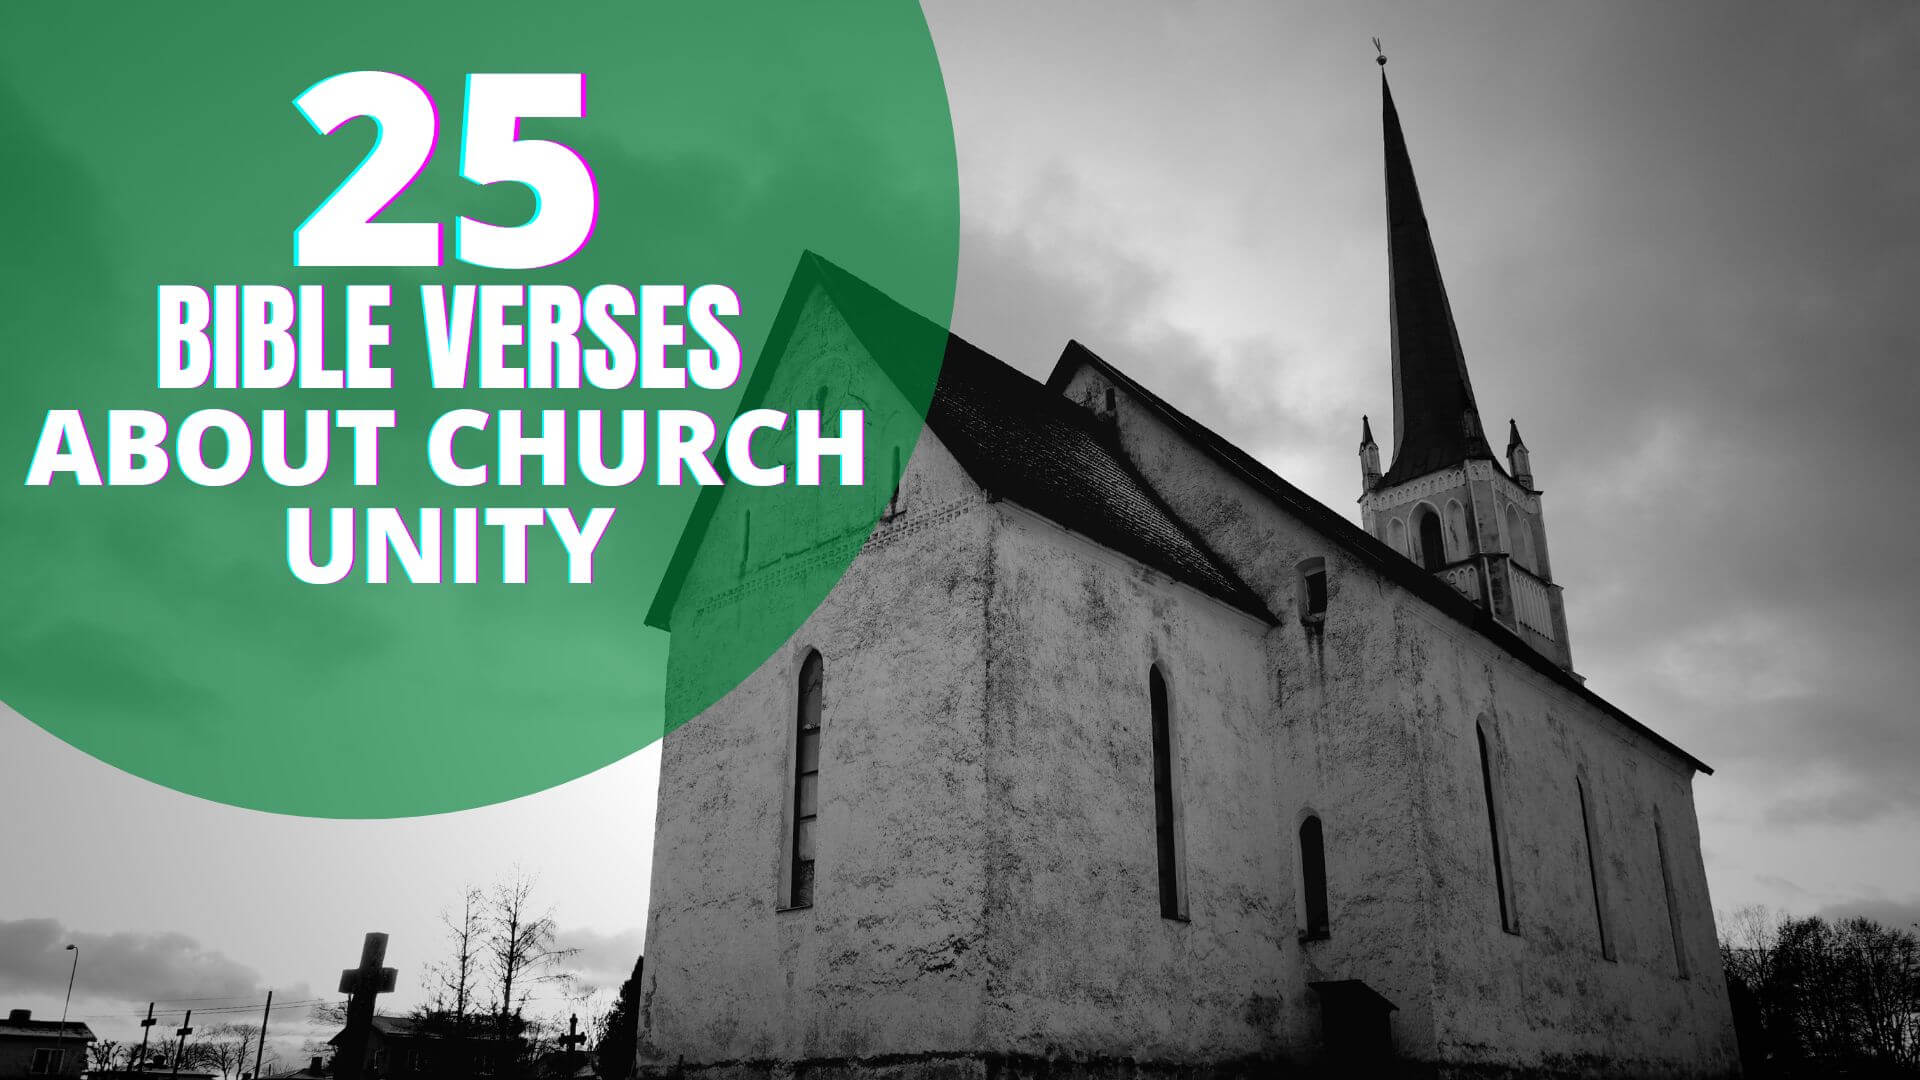 Bible verses about church unity